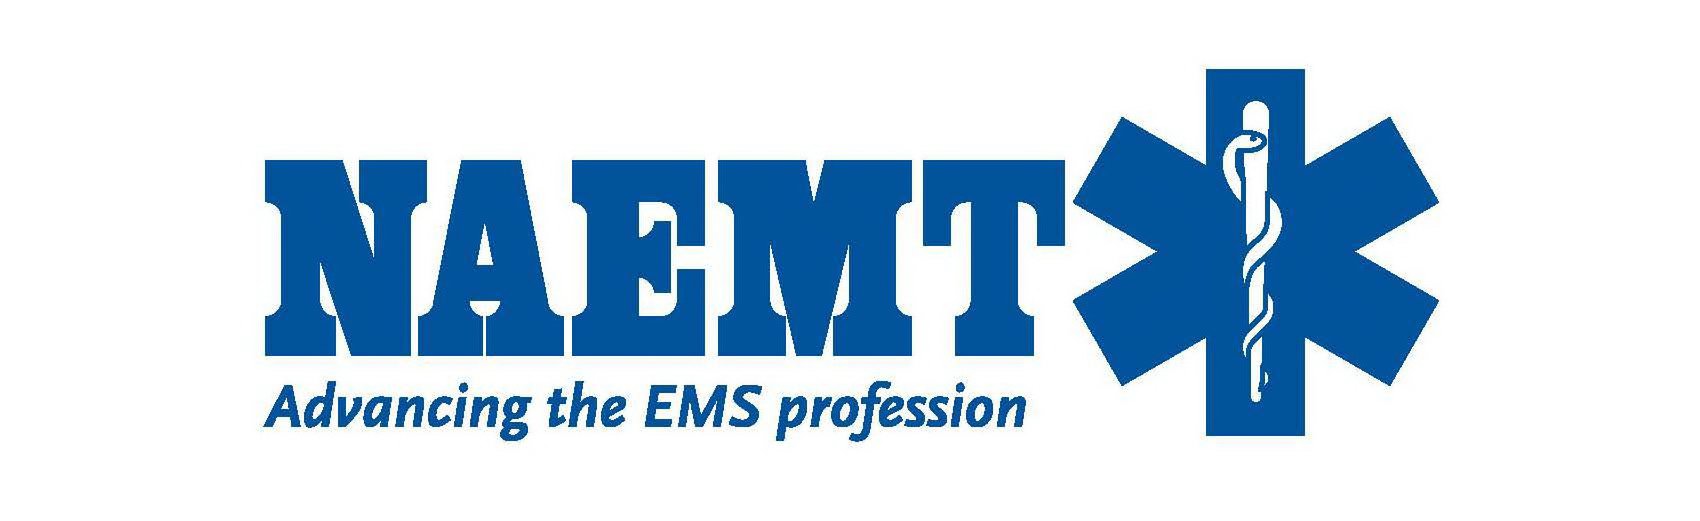  NAEMT ADVANCING THE EMS PROFESSION